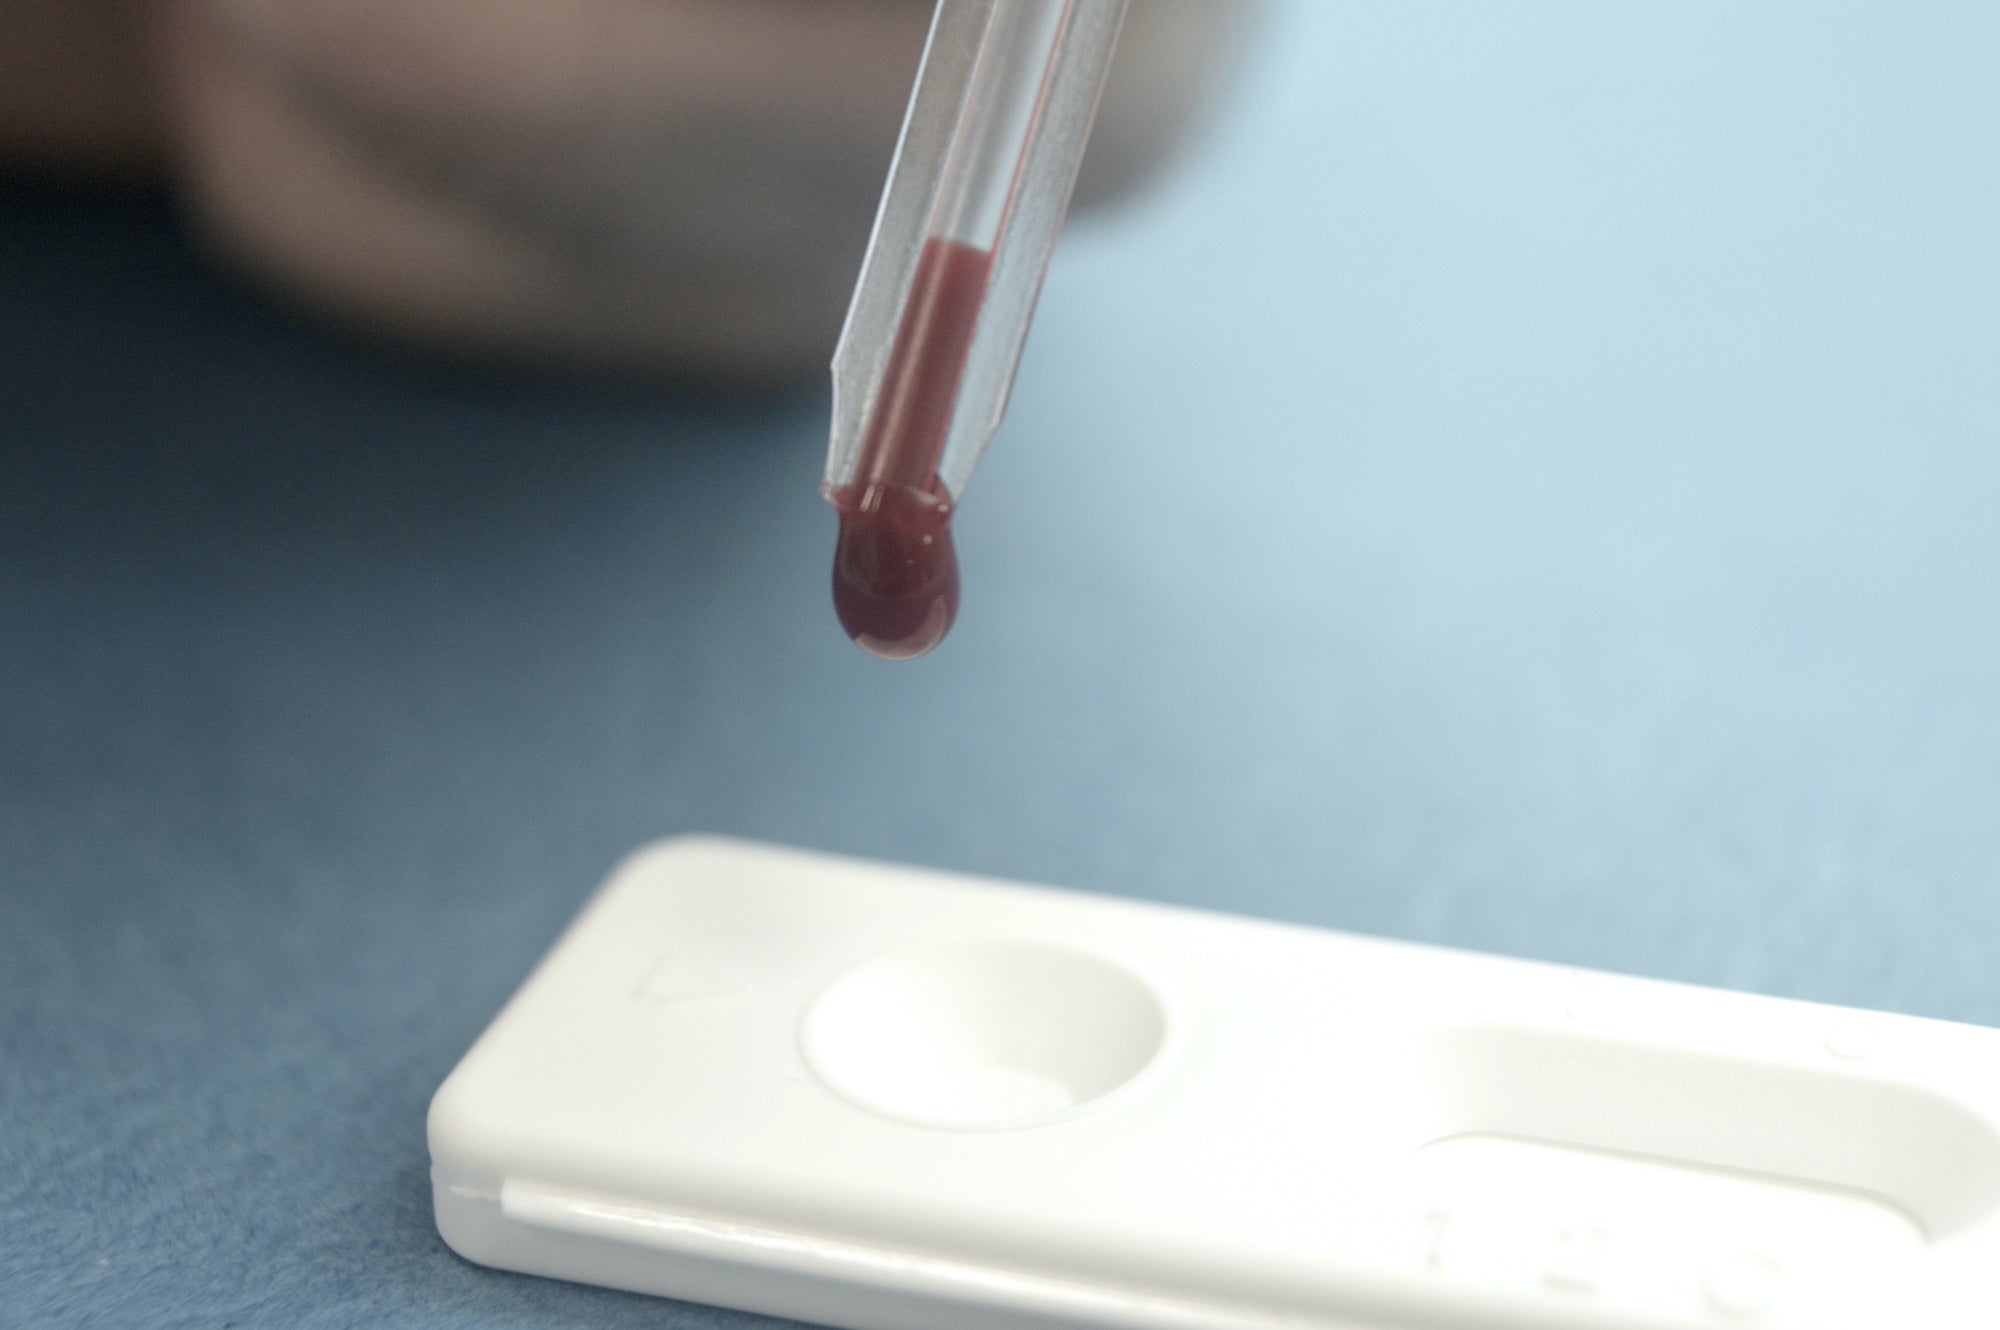 Drop of blood being added to a SELFCHECK self-test kit